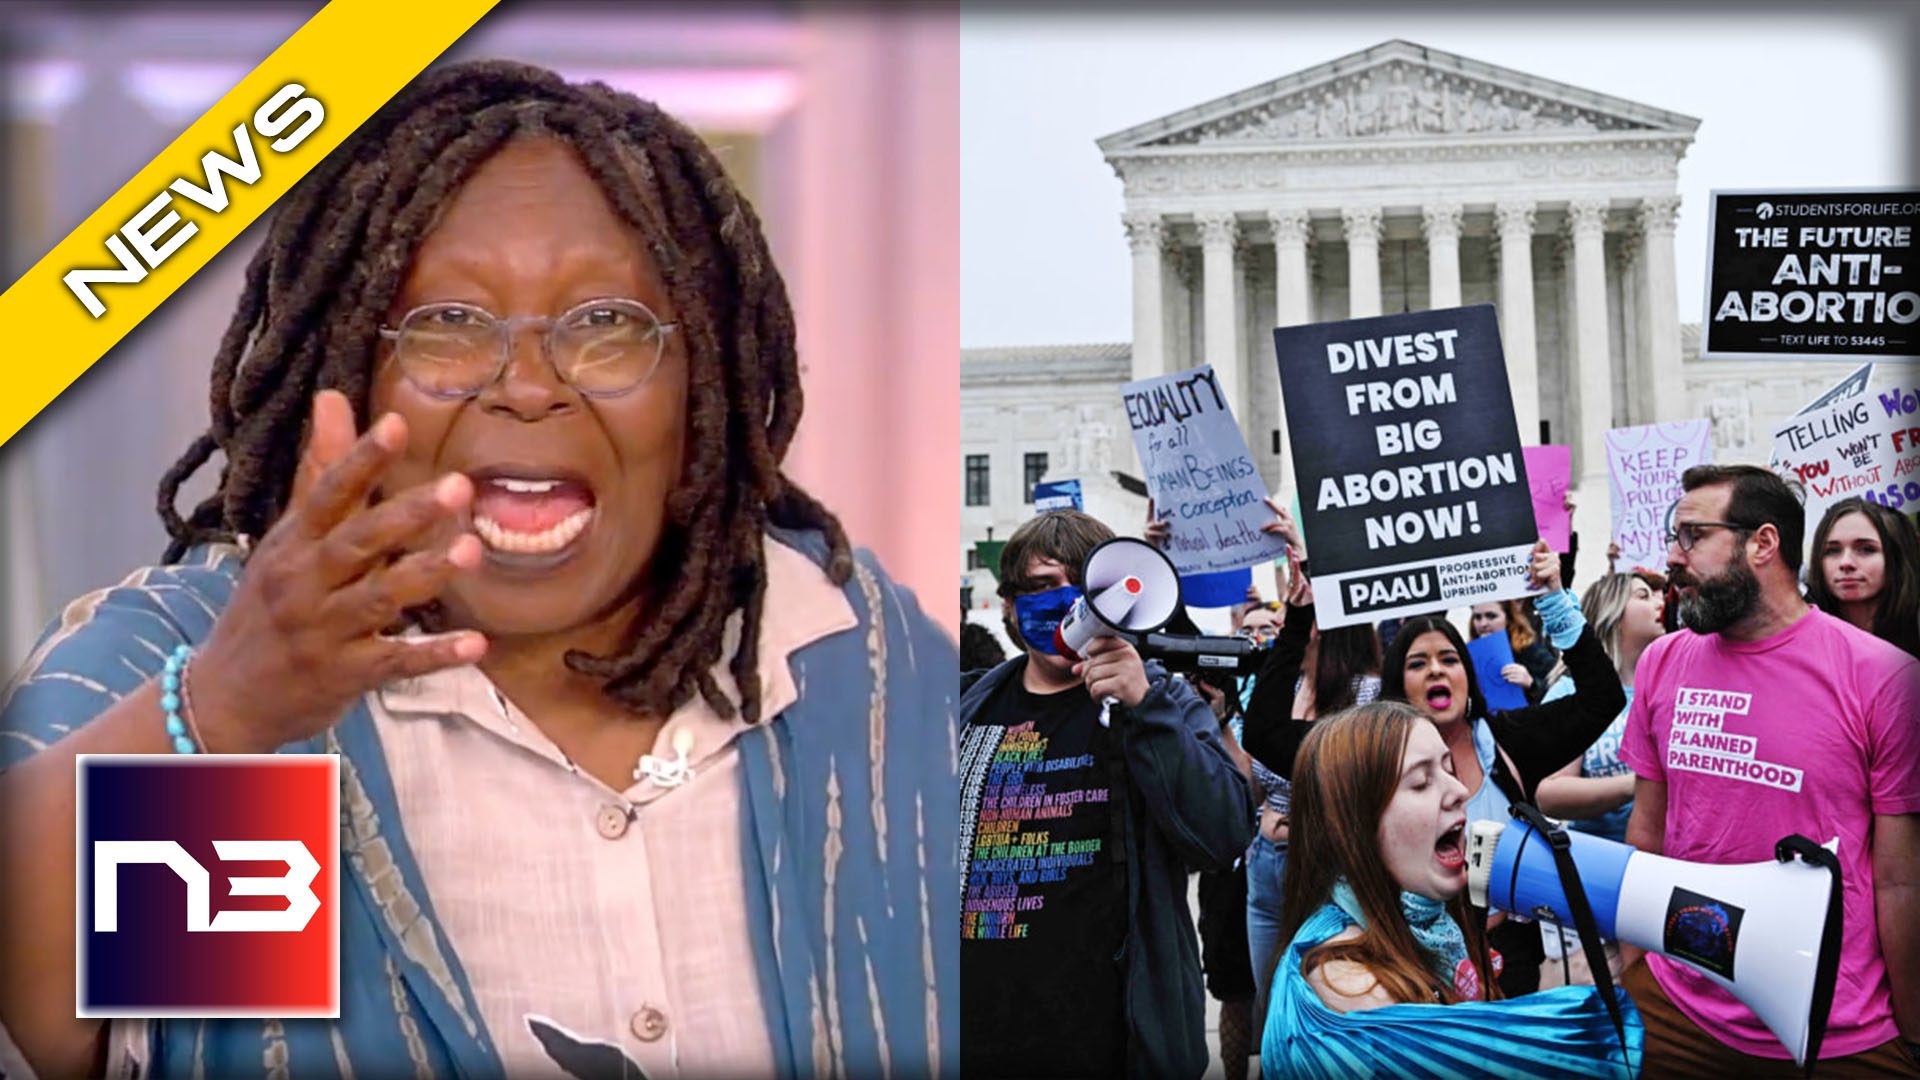 Whoopi Goldberg says overturning Roe violates her religious freedom - watch her explain why